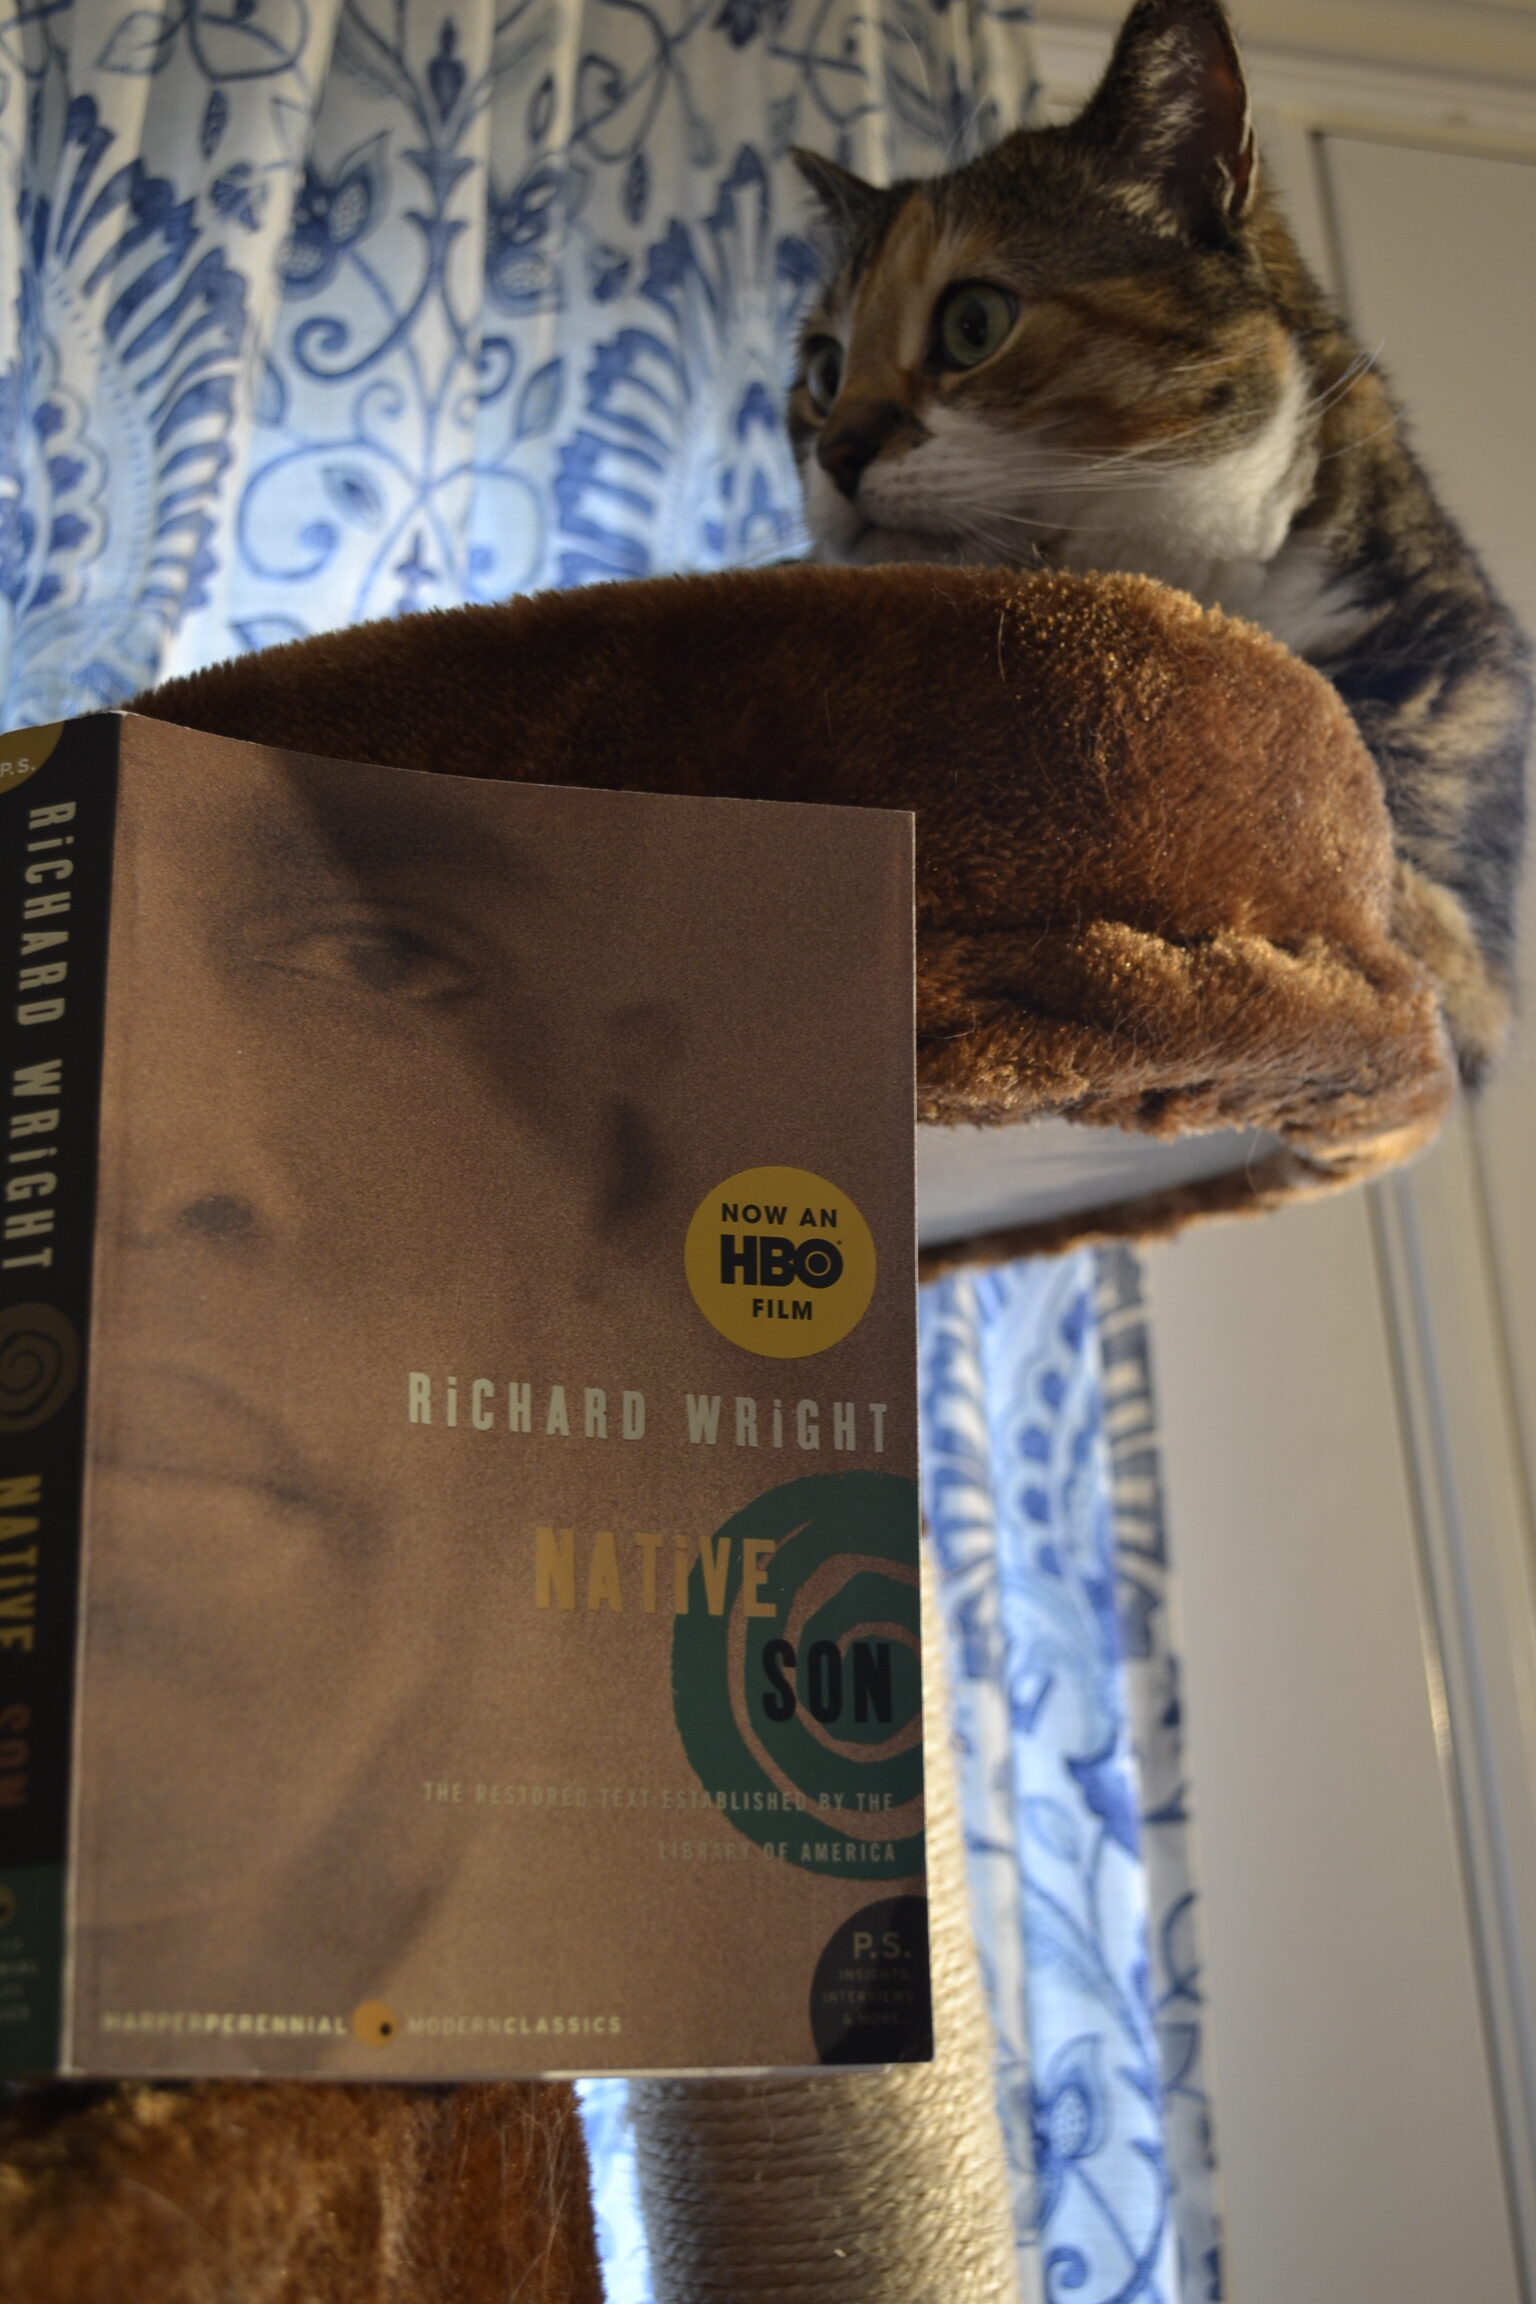 A calico tabby perches on a cat tree beside a book: Native Son by Richard Wright.